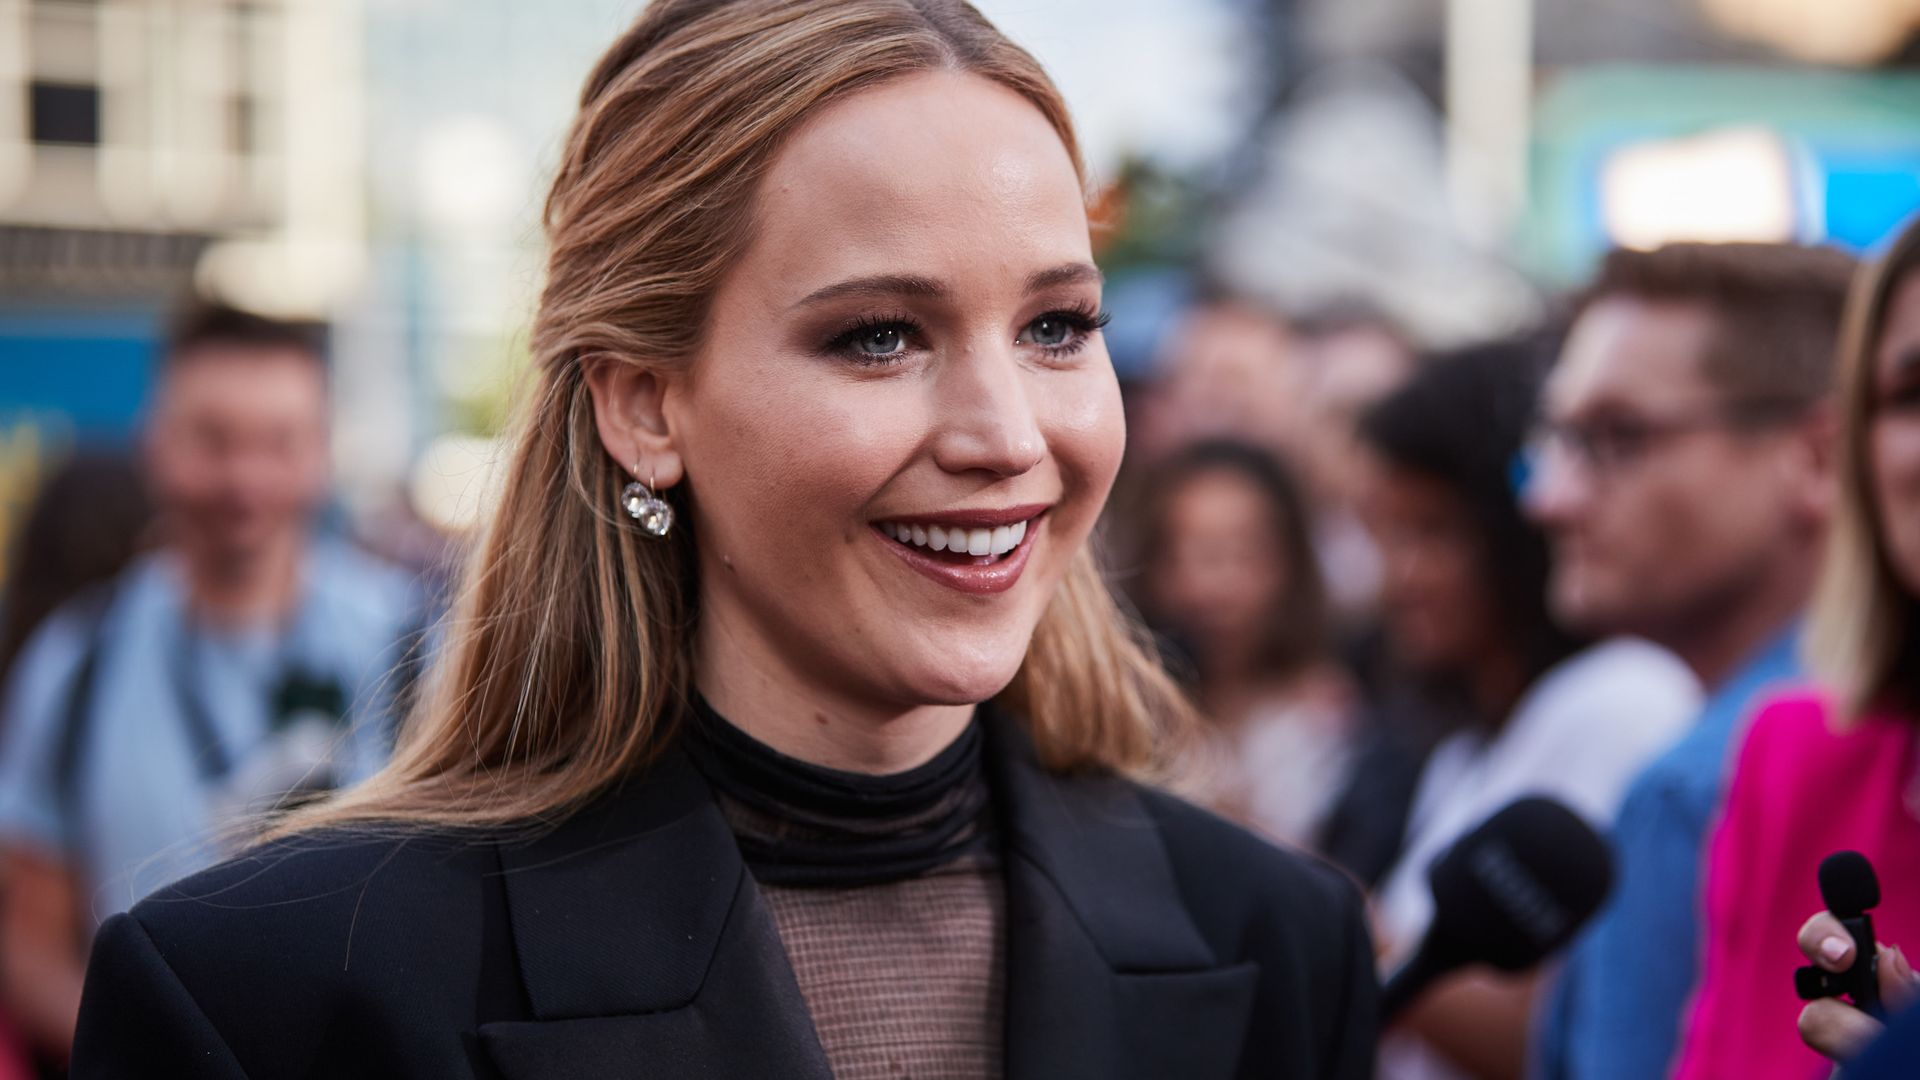 Jennifer Lawrence among high-profile actors ready to strike in open letter to Screen Actors Guild